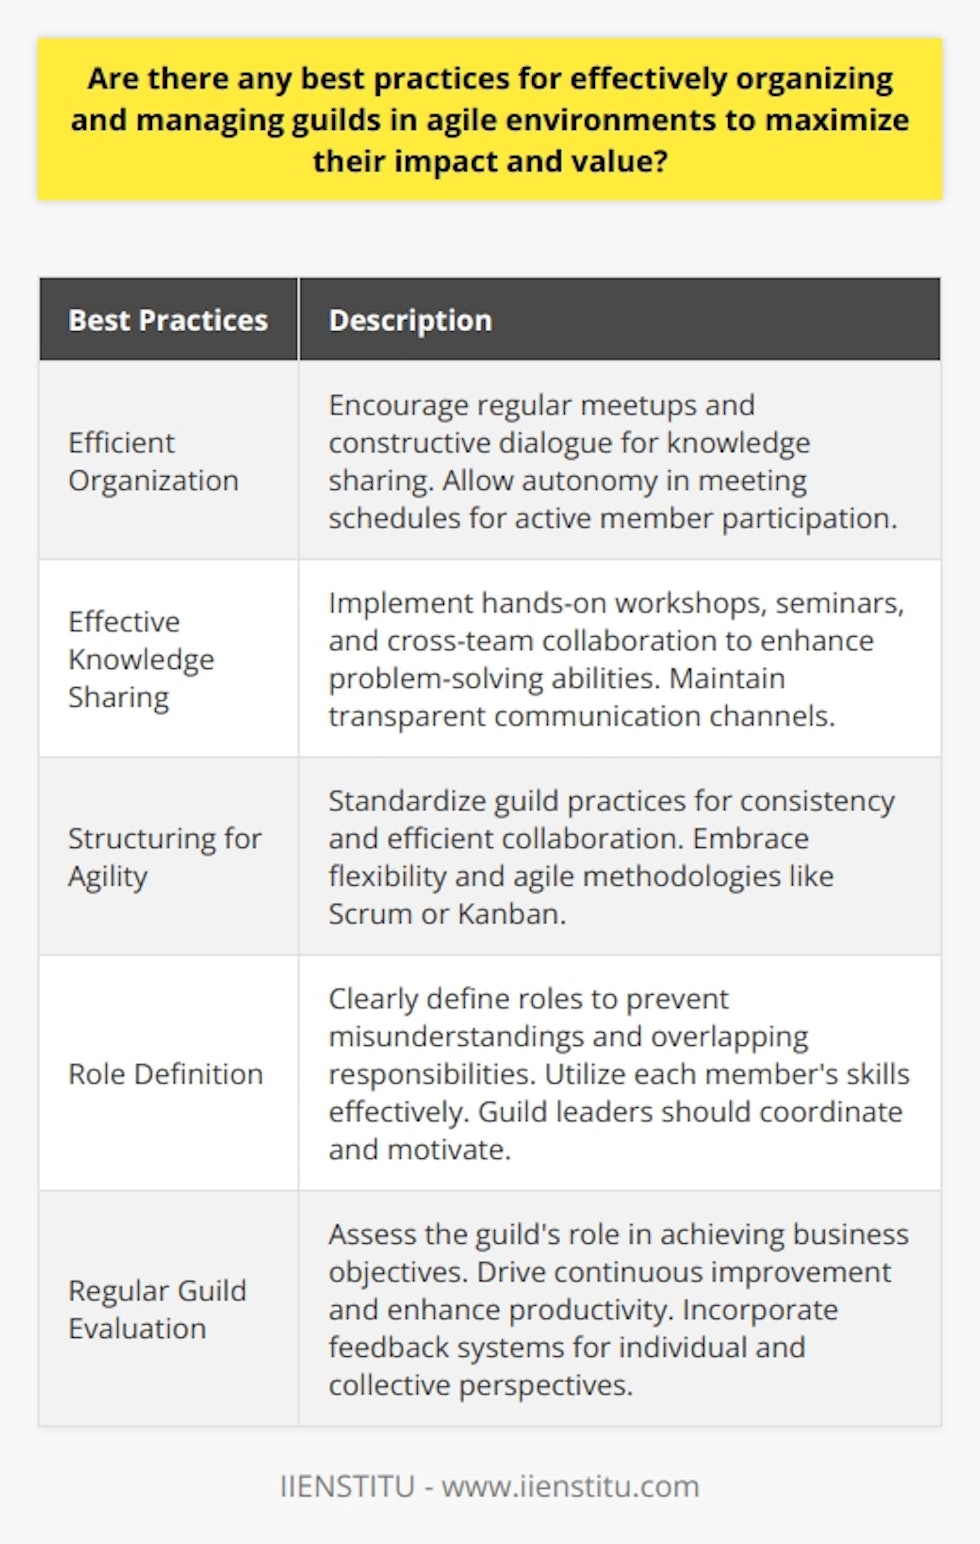 Guilds play a pivotal role in agile environments by fostering collective knowledge sharing and enhancing overall impact and value. Effective guild management is essential to ensure the success of these platforms. This article will discuss best practices for organizing and managing guilds in agile environments to maximize their impact and value.The first best practice for guild organization is efficient organization. Regular meetups and constructive dialogue should be encouraged to facilitate knowledge sharing. Autonomy in choosing meeting schedules allows for active member participation, ensuring that all members can actively contribute to the guild.Implementing effective knowledge sharing techniques is another crucial best practice. Hands-on workshops and seminars provide opportunities for members to apply their knowledge and learn from one another. Cross-team collaboration further fosters innovation and enhances problem-solving abilities within the guild. Transparent communication channels are vital for effective knowledge sharing.Structuring the guild for agility is also fundamental. Standardization of practices ensures consistency across the guild, promoting efficient collaboration and coordination. Bureaucracy should be minimized, and flexibility embraced to adapt to changing circumstances. Agile methodologies, such as Scrum or Kanban, can be particularly useful when structuring project-specific guilds.Role definition is another key practice for effective guild management. Clear role definitions prevent misunderstandings and overlapping responsibilities within the guild. It ensures that each member's skills and abilities are maximally utilized. A guild leader should effectively fulfill coordinating and motivating roles.The evaluation of guilds is as significant as other practices. Regular assessments of the guild's role in achieving broader business objectives help maintain focus and drive continuous improvement. These assessments provide valuable insights for enhancing productivity and identifying areas for improvement. It is essential to have feedback systems in place that accommodate both individual and collective perspectives.To summarize, there are several best practices for effectively organizing and managing guilds in agile environments. These include efficient organization, implementing effective knowledge sharing techniques, structuring for agility, role definitions, and regular guild evaluation. Incorporating these practices will maximize the impact and value of guilds, benefiting both the guild and the wider organizational framework.